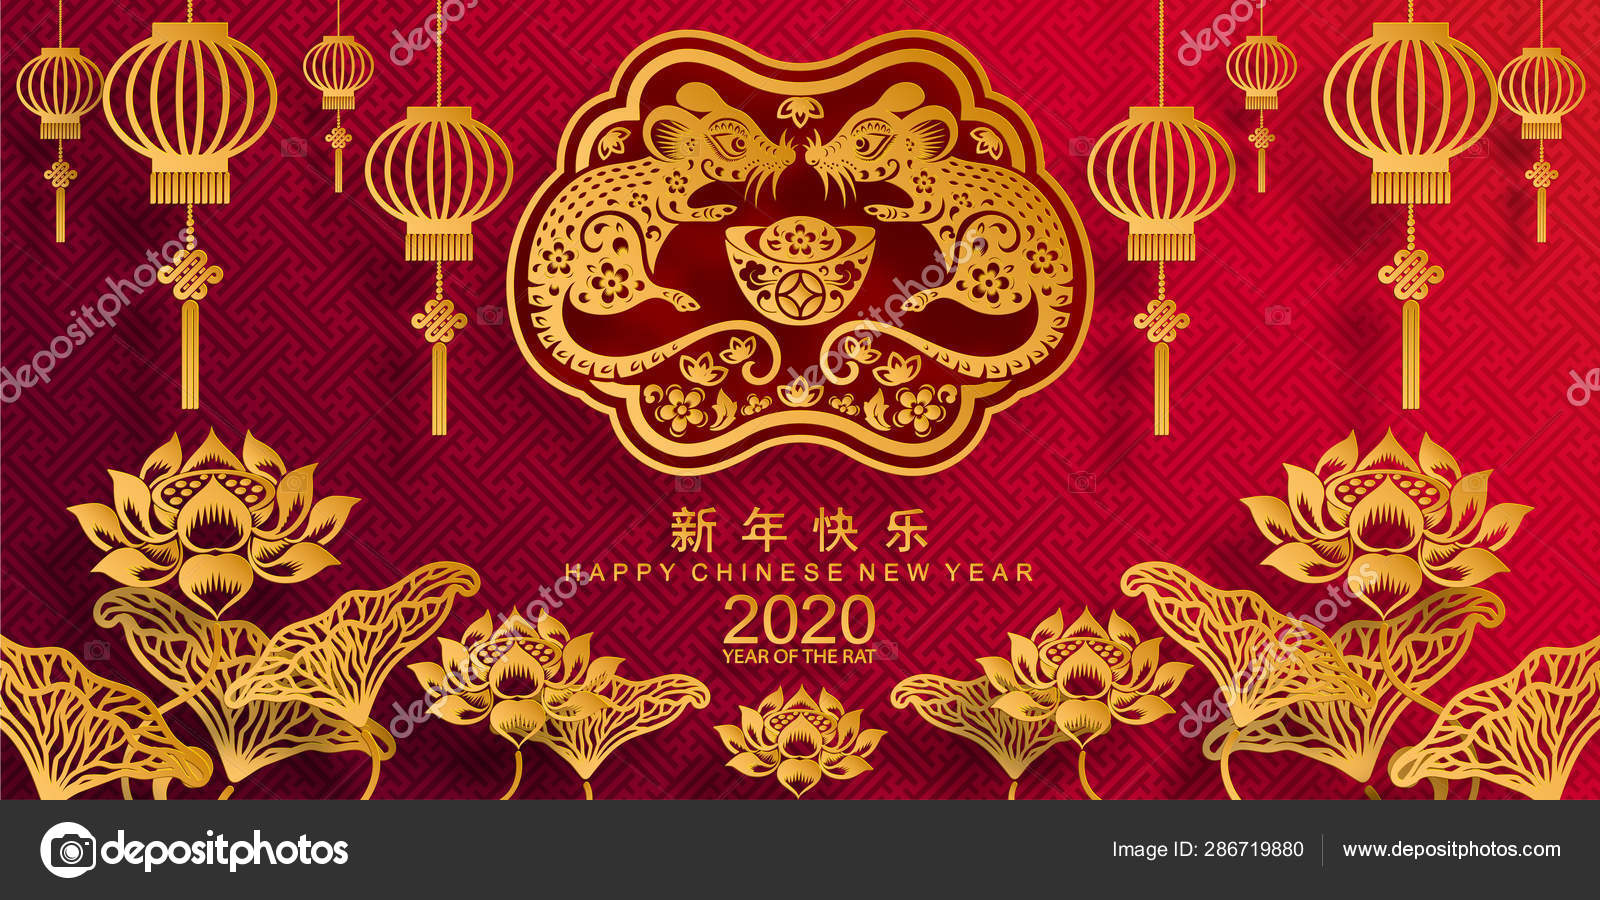 AOFOTO 15x8ft Happy Chinese New Year Backdrop 2020 Year of The Rat Spring Festival Celebration Paper Cut Mouse Fan Flowers Asian Elements Background for Photography Photos Prop Vinyl